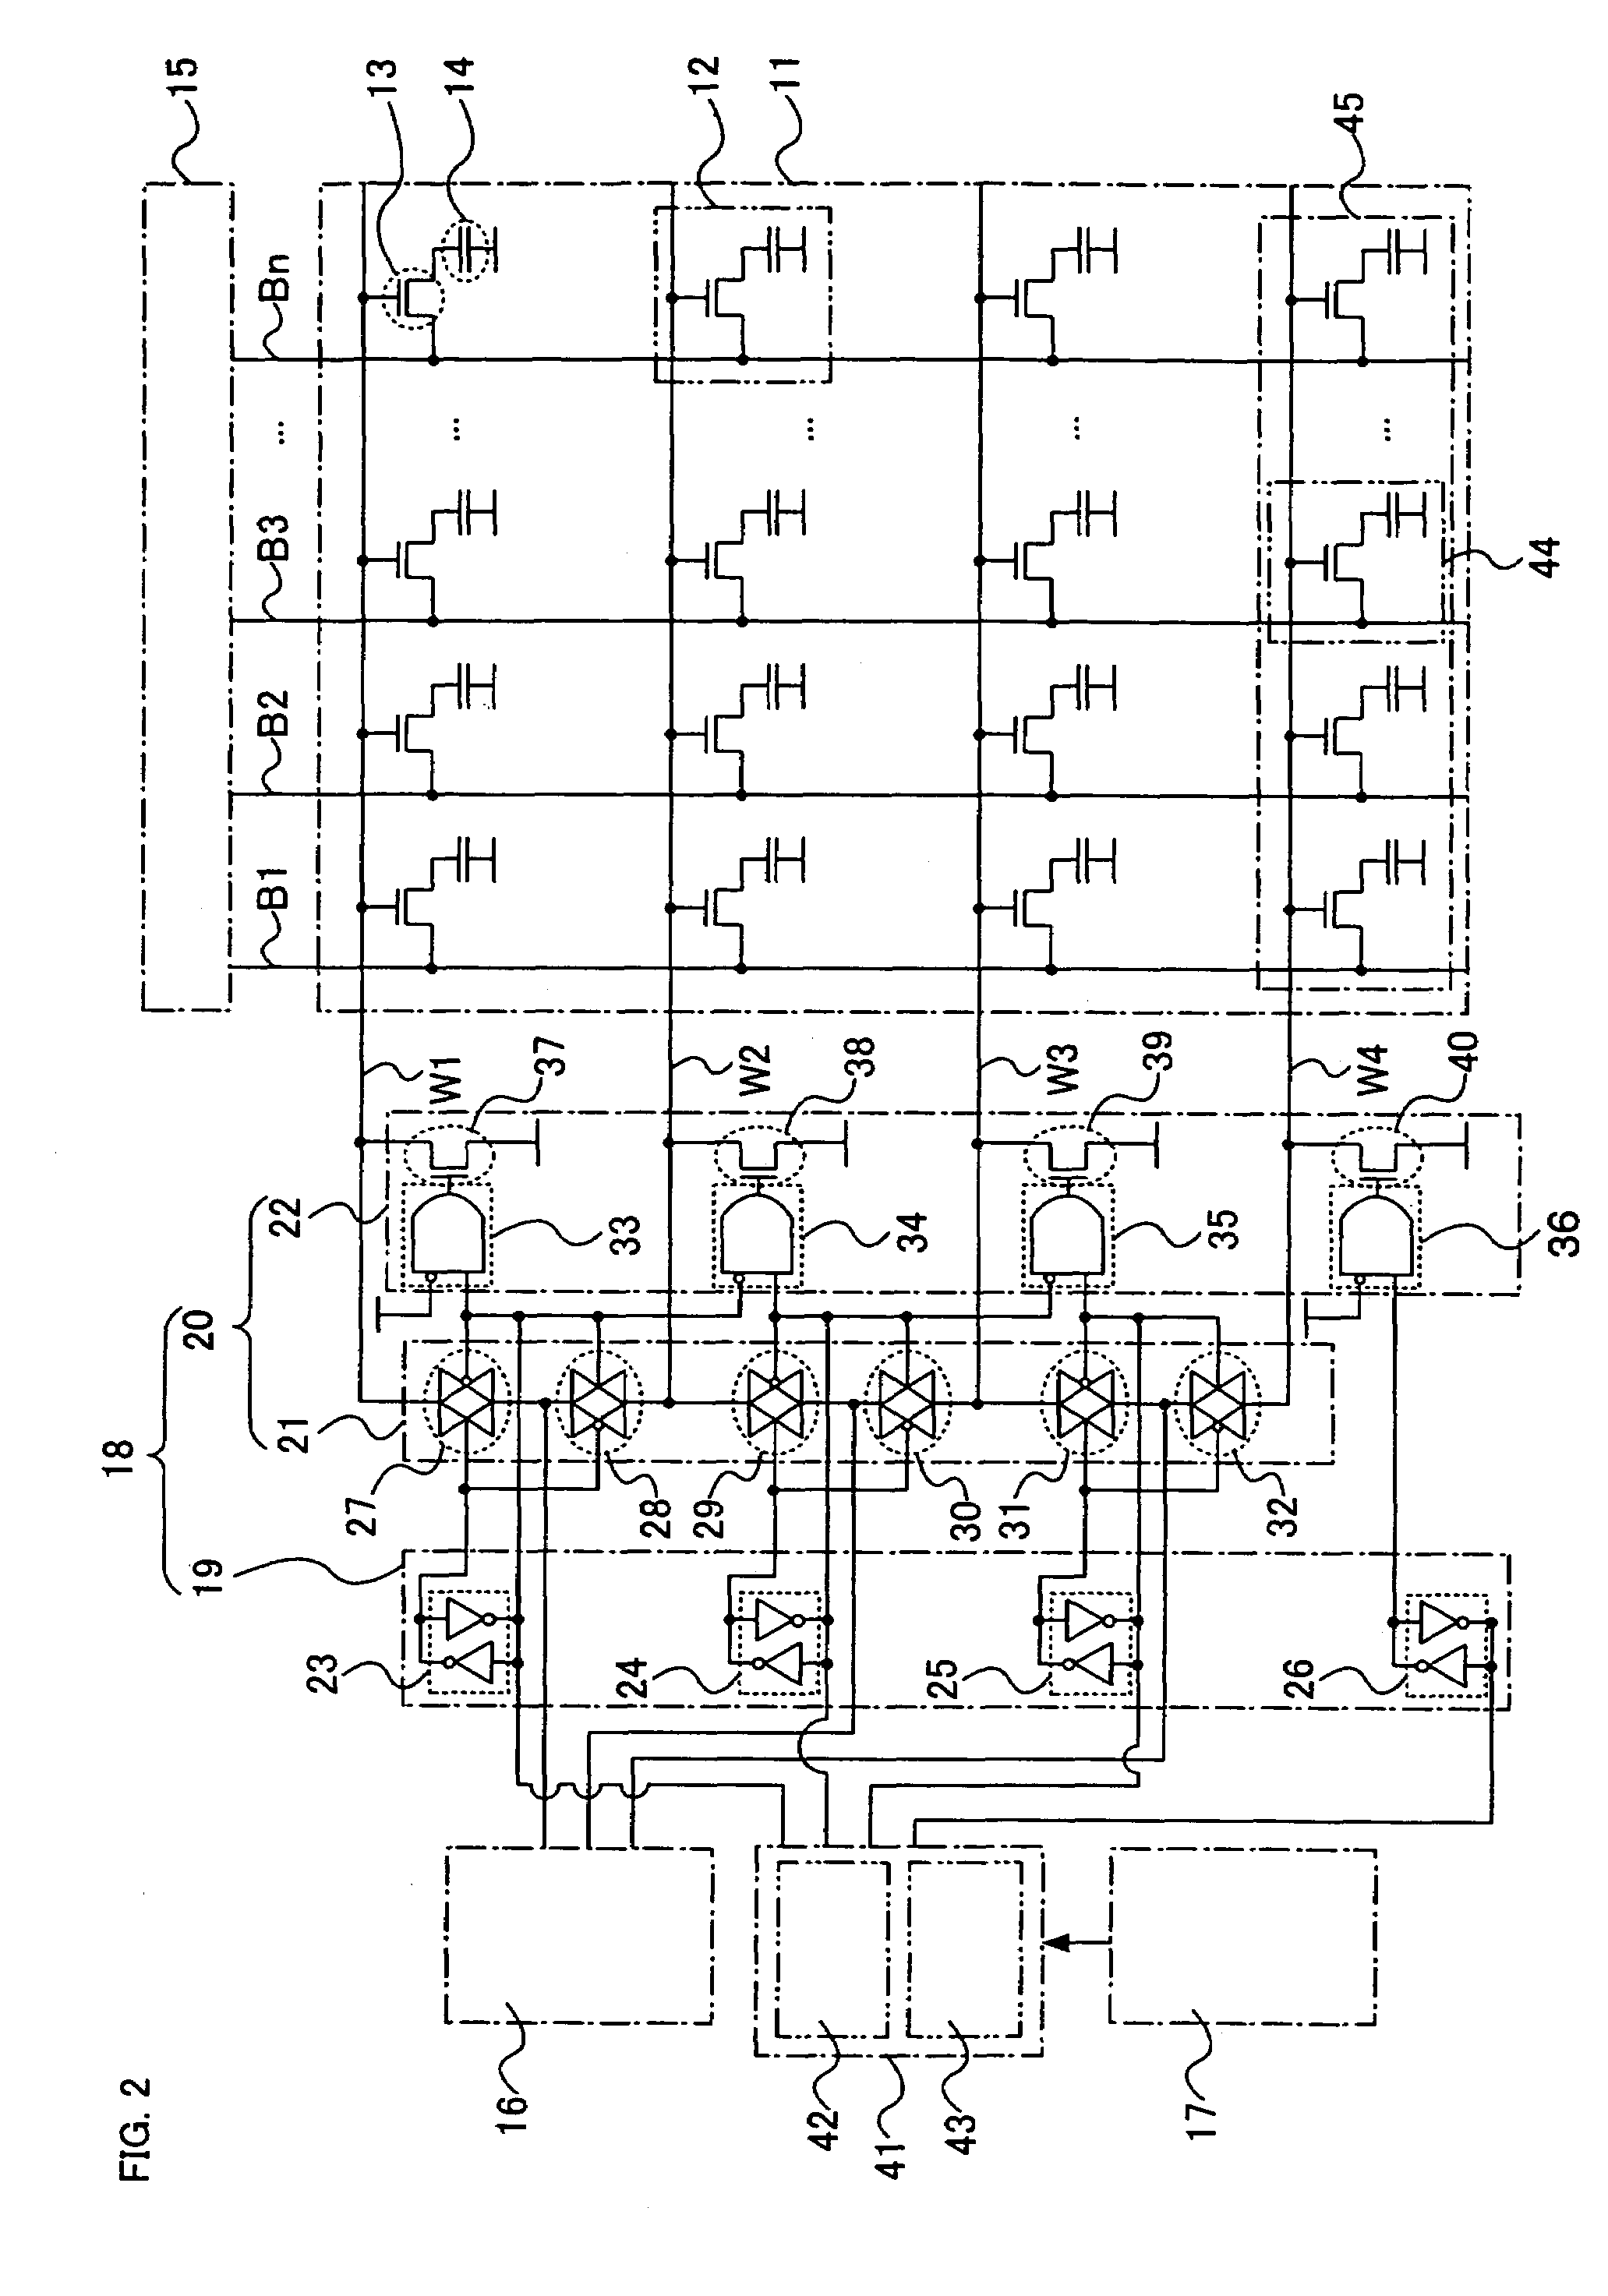 Semiconductor device for rectifying memory defects